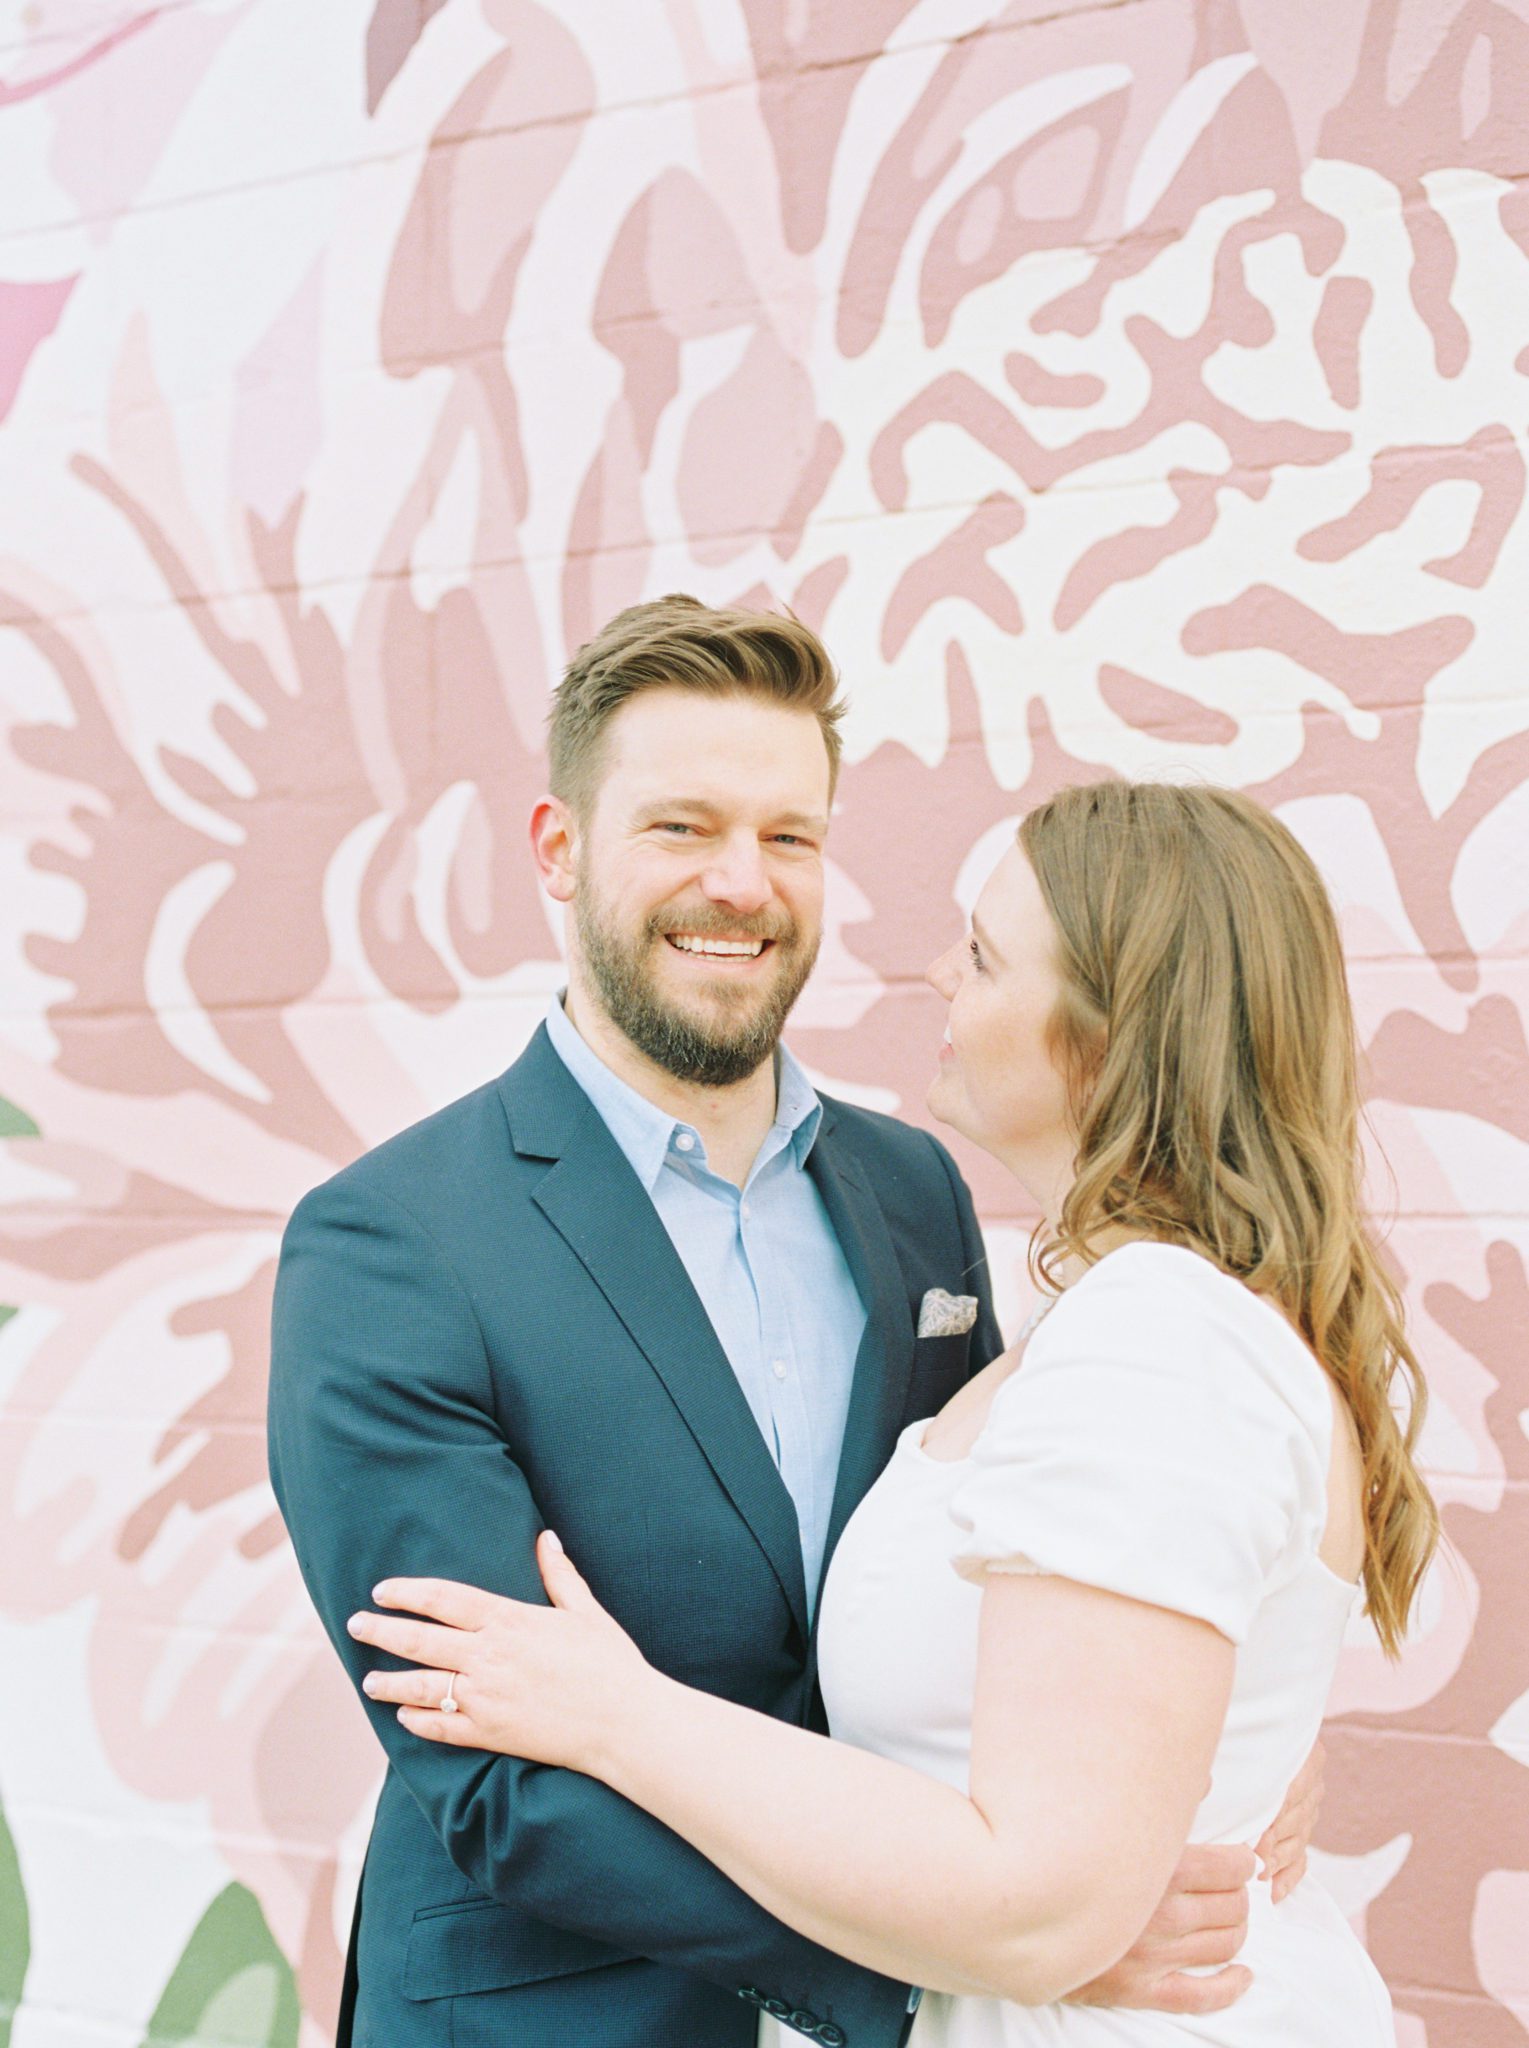 Stylish and romantic engagement photos in Edmonton Alberta with a pink floral wall